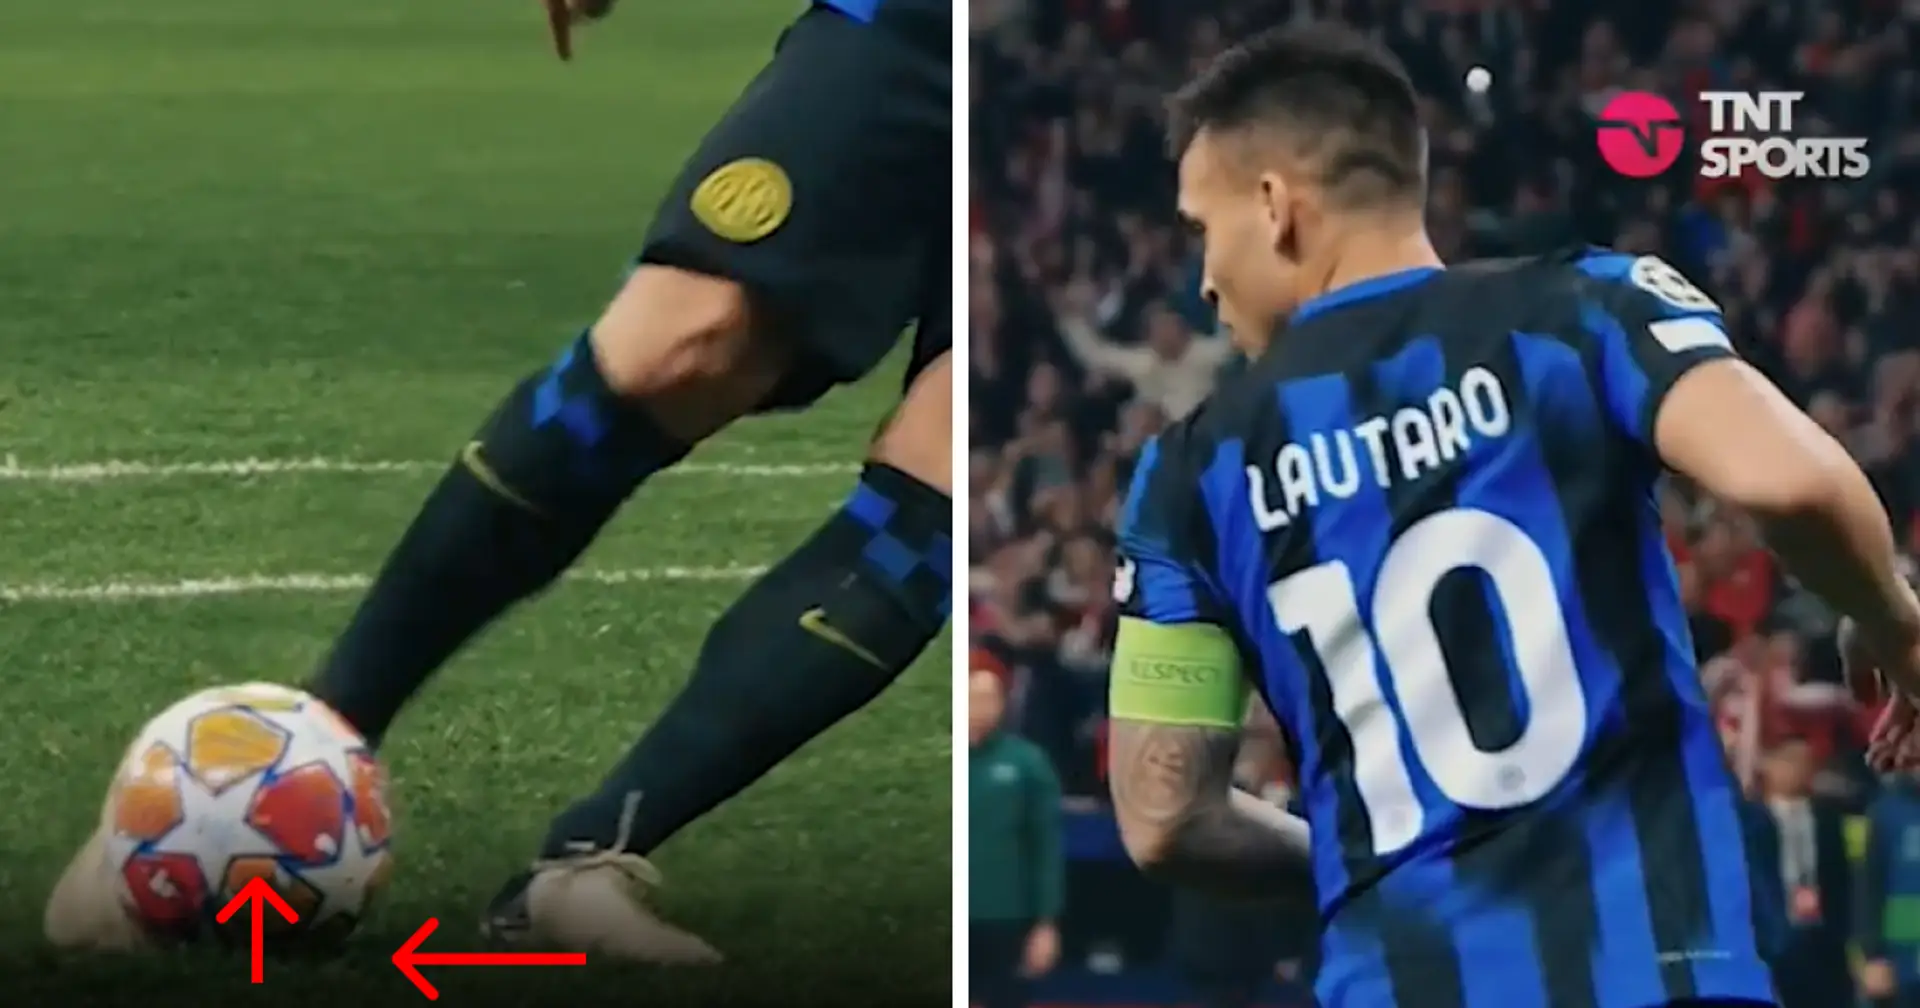 Unexpected footage shows penalty spot moving during Lautaro Martinez's miss against Atletico Madrid